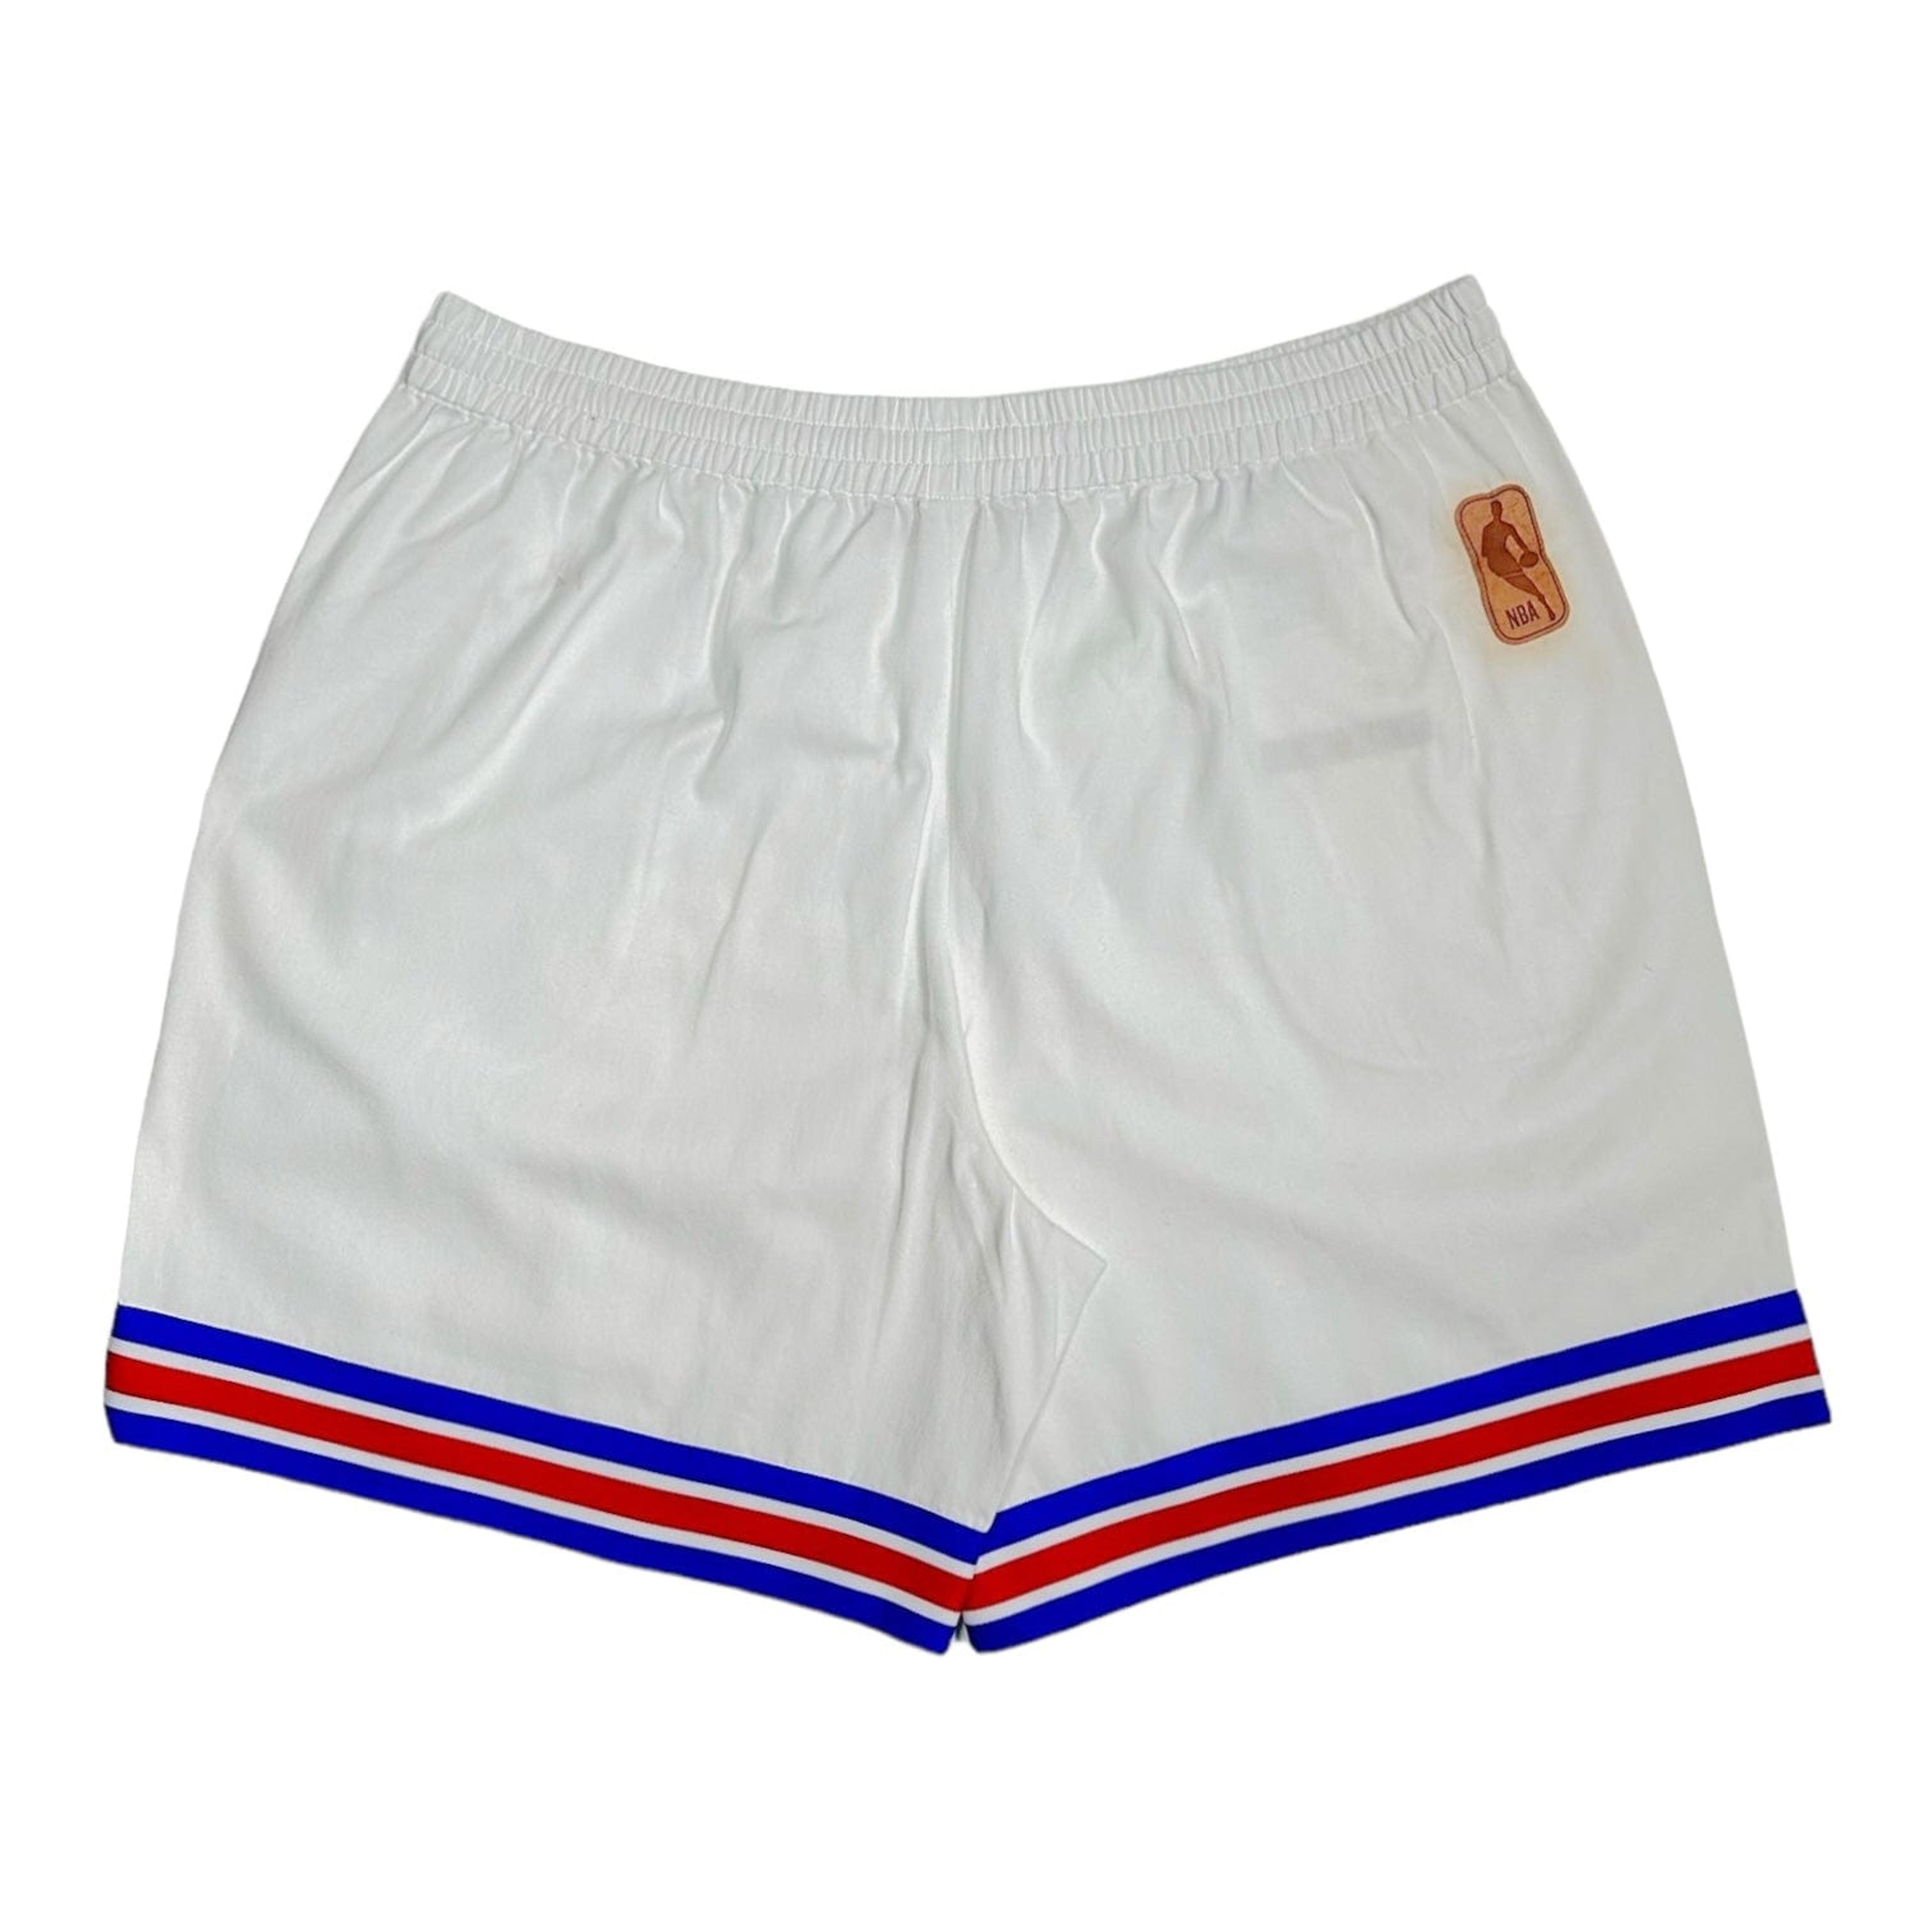 Alternate View 1 of Louis Vuitton x NBA Basketball Shorts Beige Pre-Owned